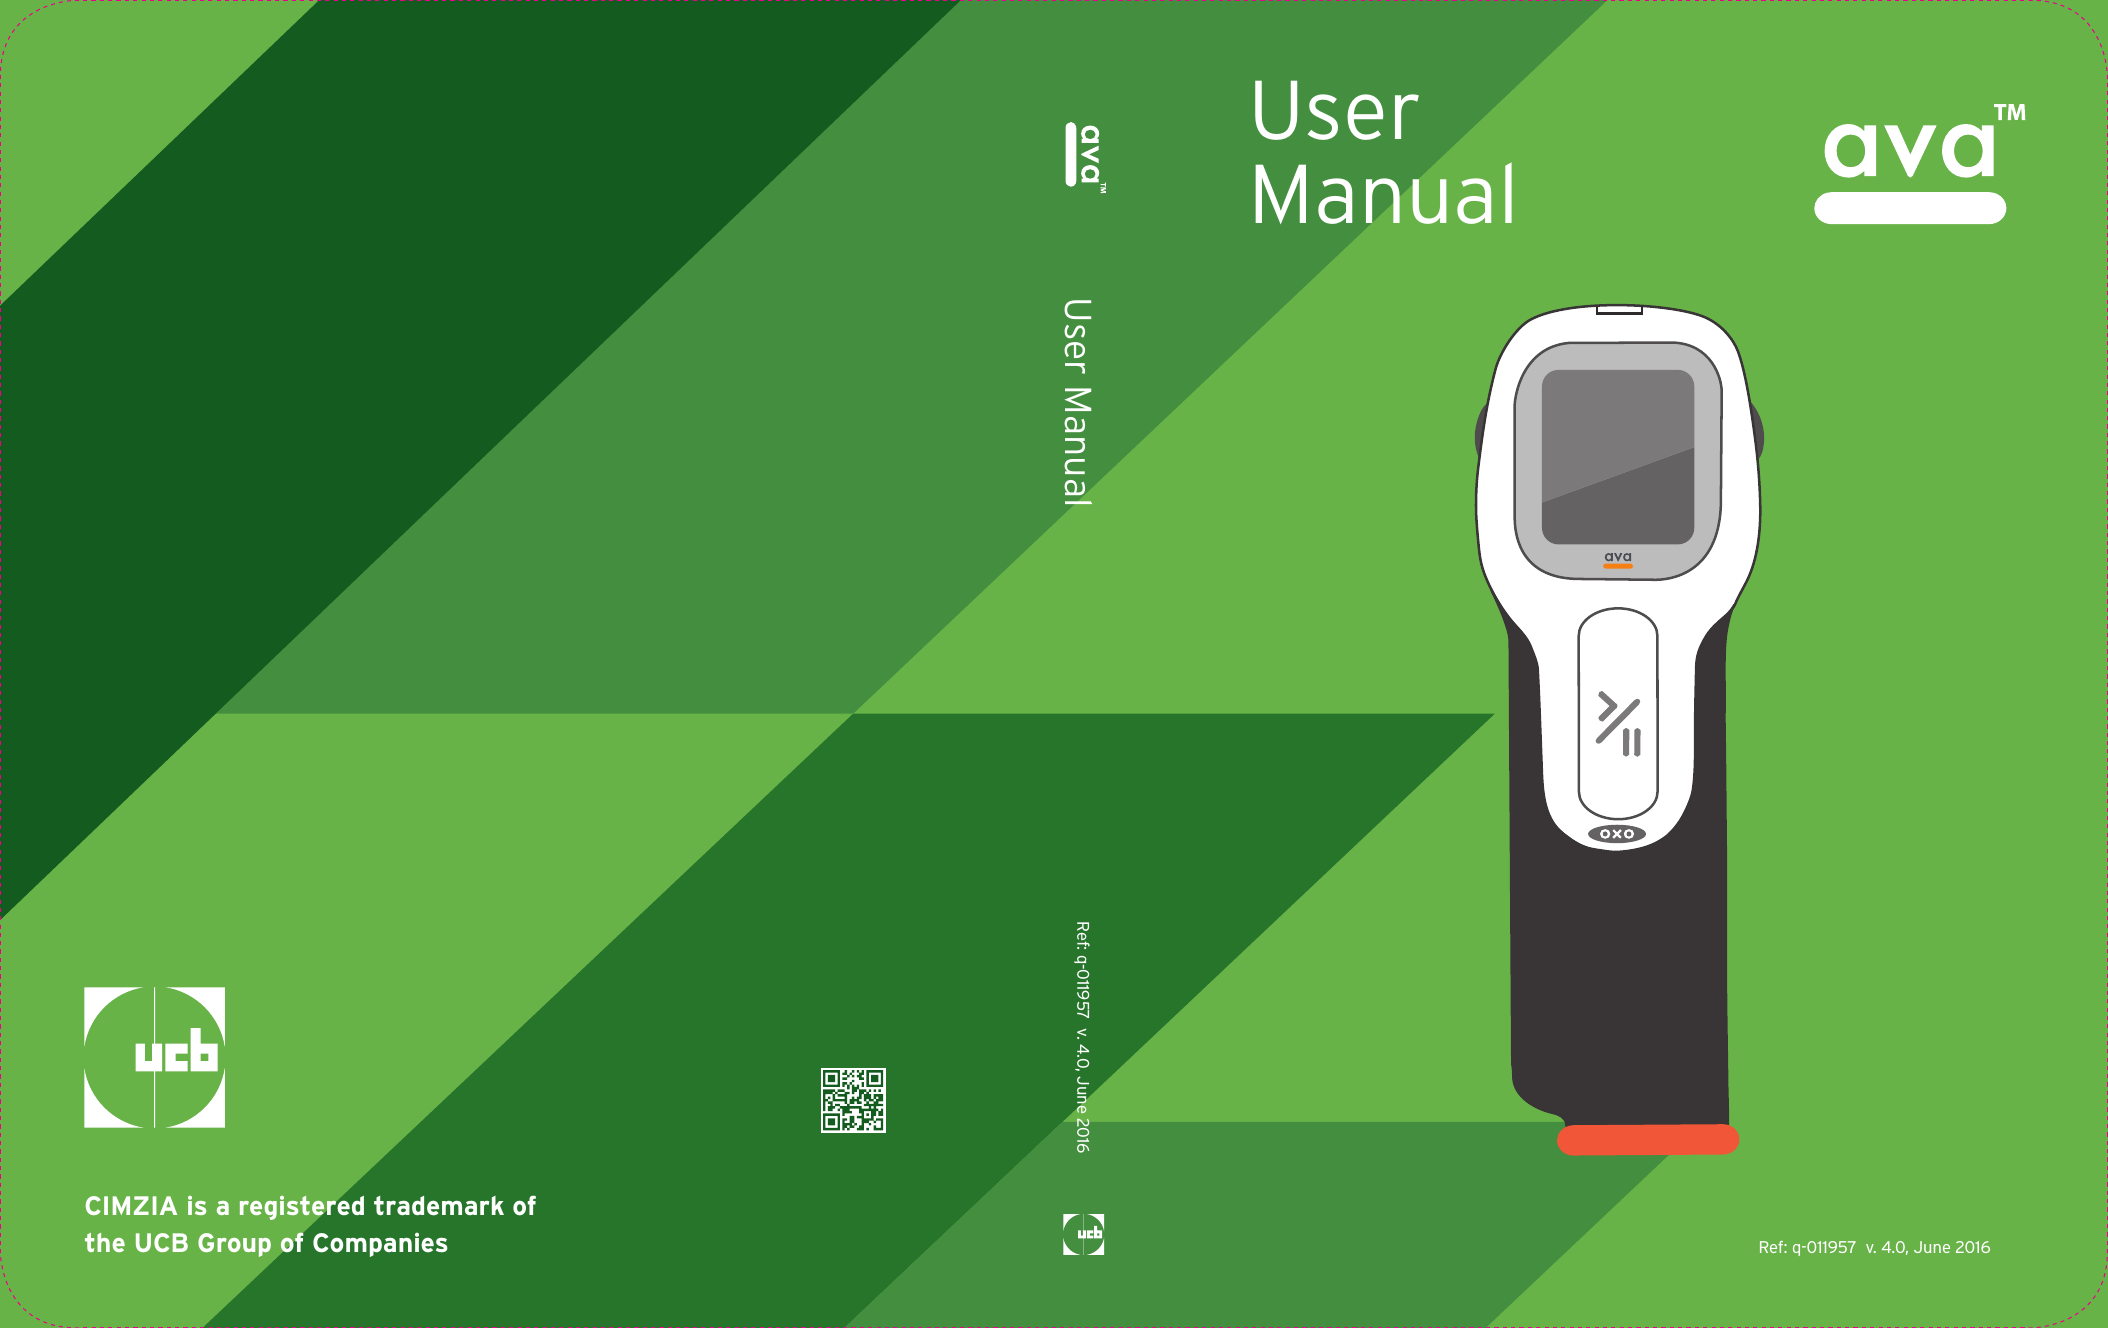 UserManualUser Manual Ref: q-011957  v. 4.0, June 2016Ref: q-011957  v. 4.0, June 2016CIMZIA is a registered trademark of the UCB Group of Companies